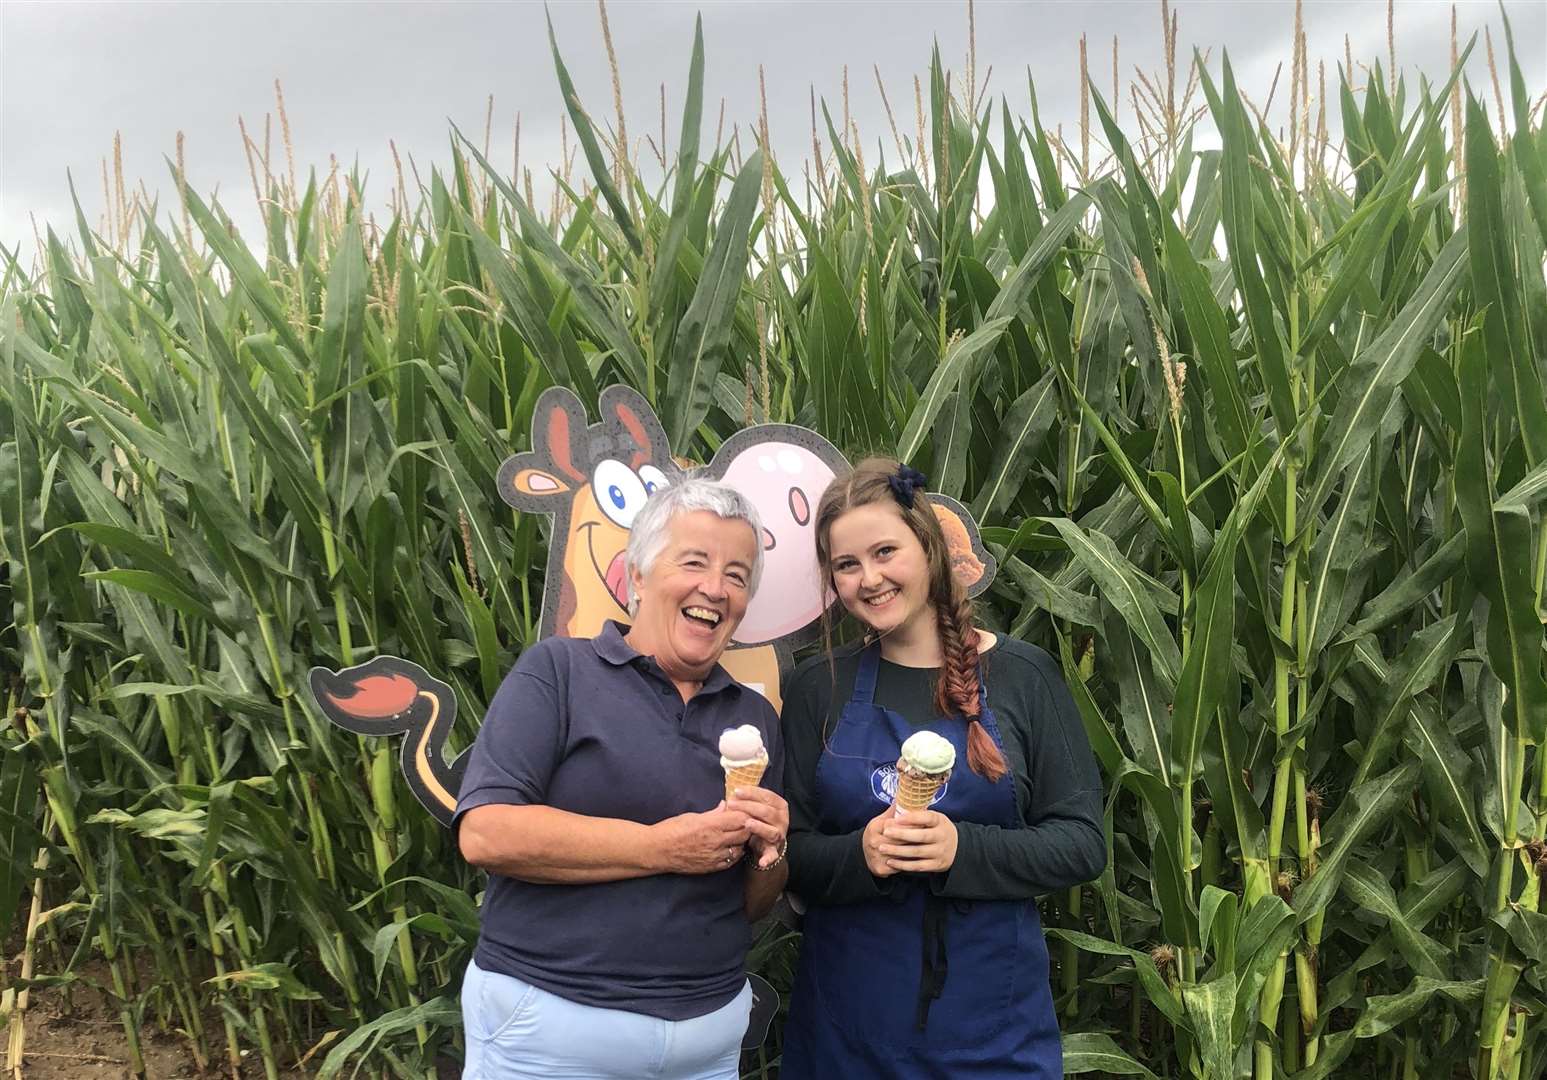 Kathy Wood and Honey Harrop enjoy an ice cream in front of the Maize Maze which will be open during the one-day festival